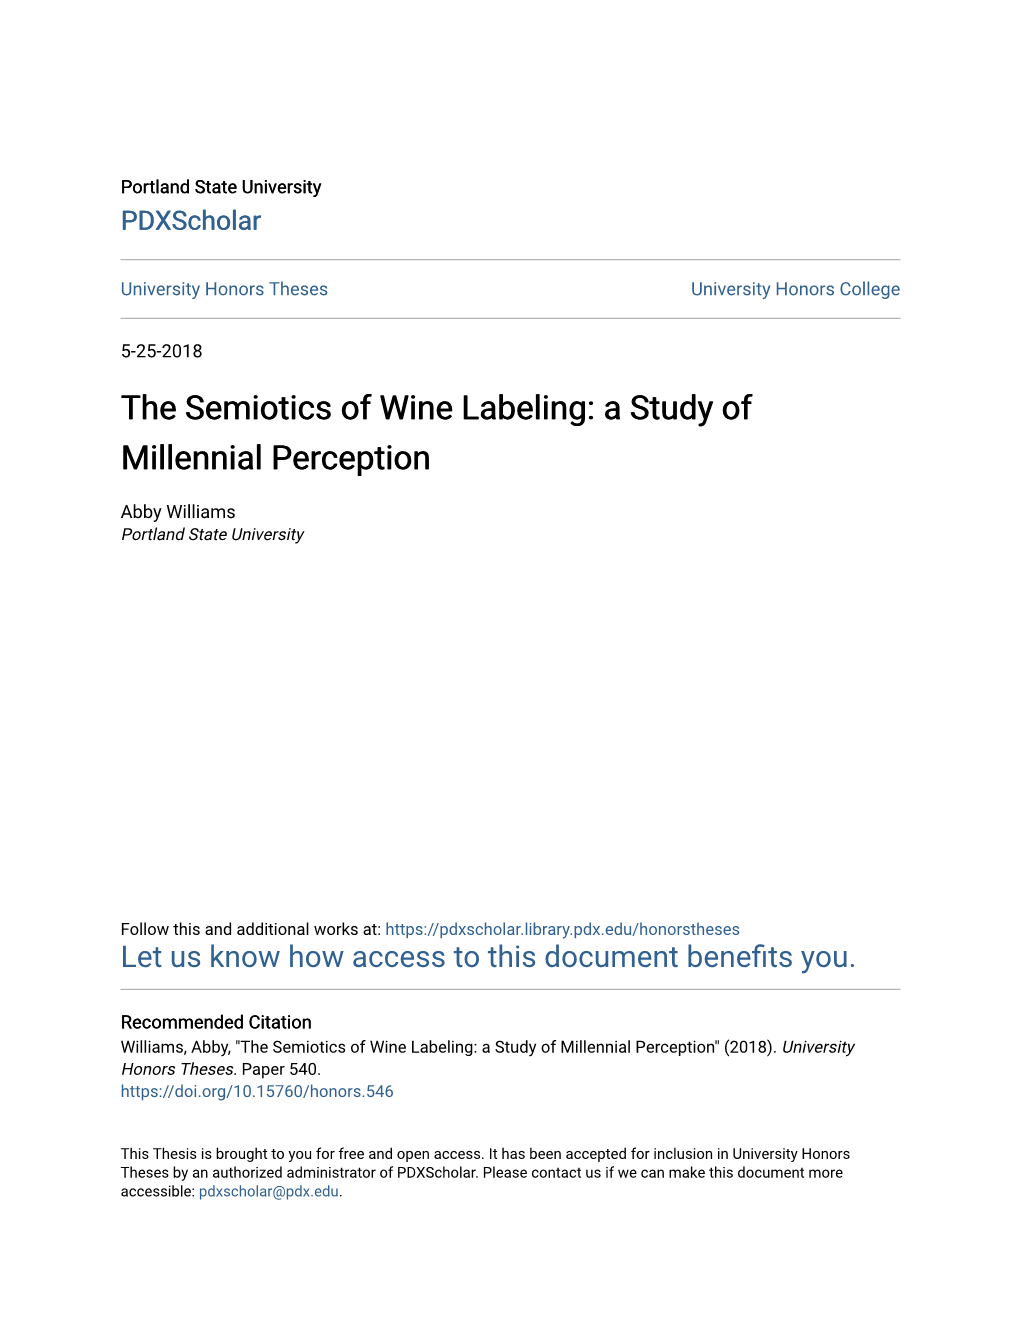 The Semiotics of Wine Labeling: a Study of Millennial Perception